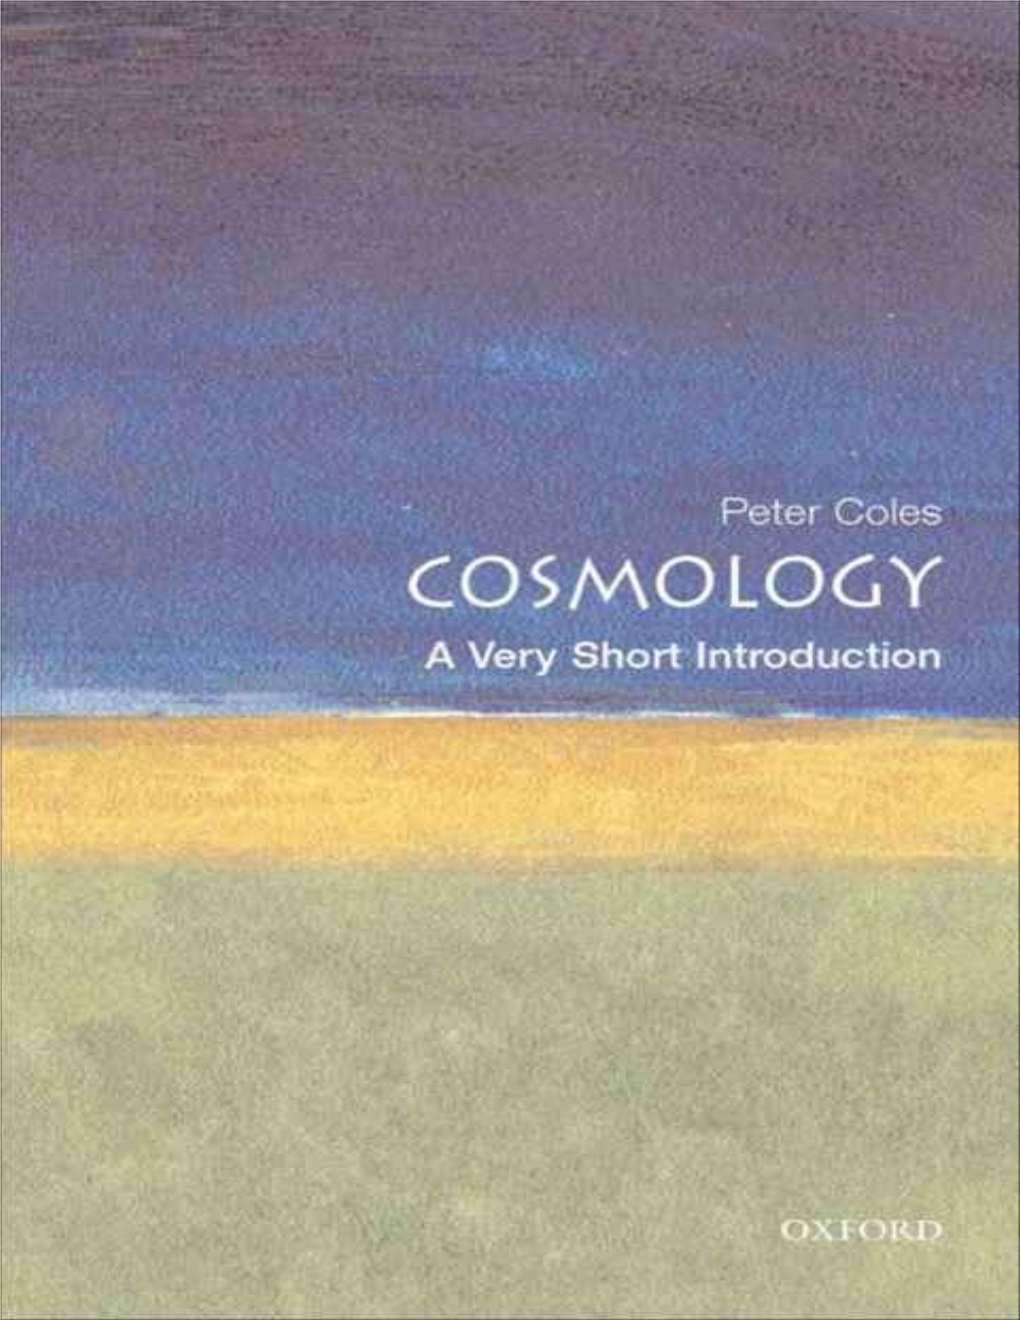 Cosmology: a Very Short Introduction